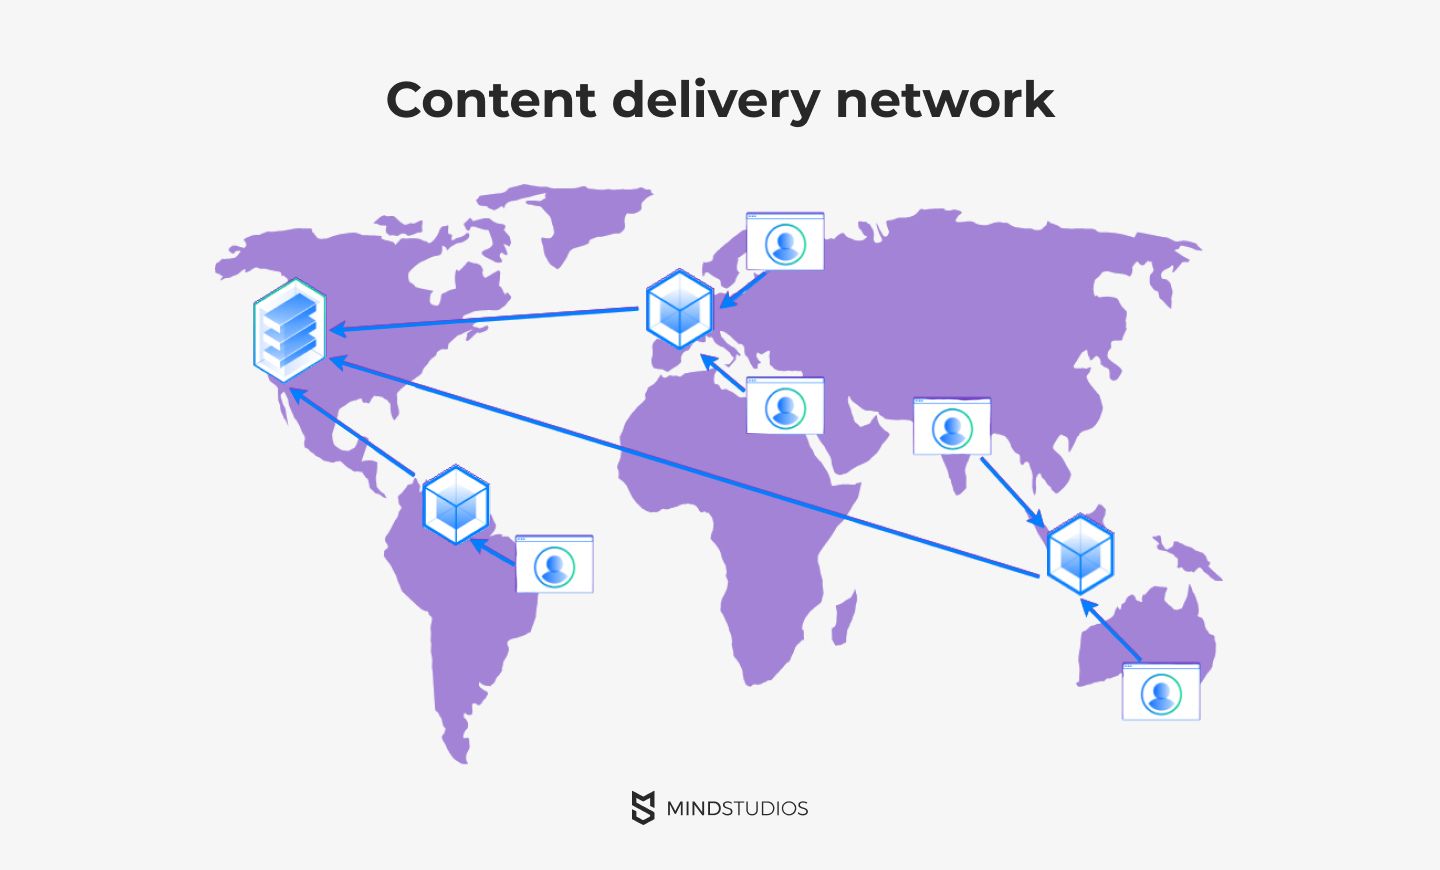 Content delivery network